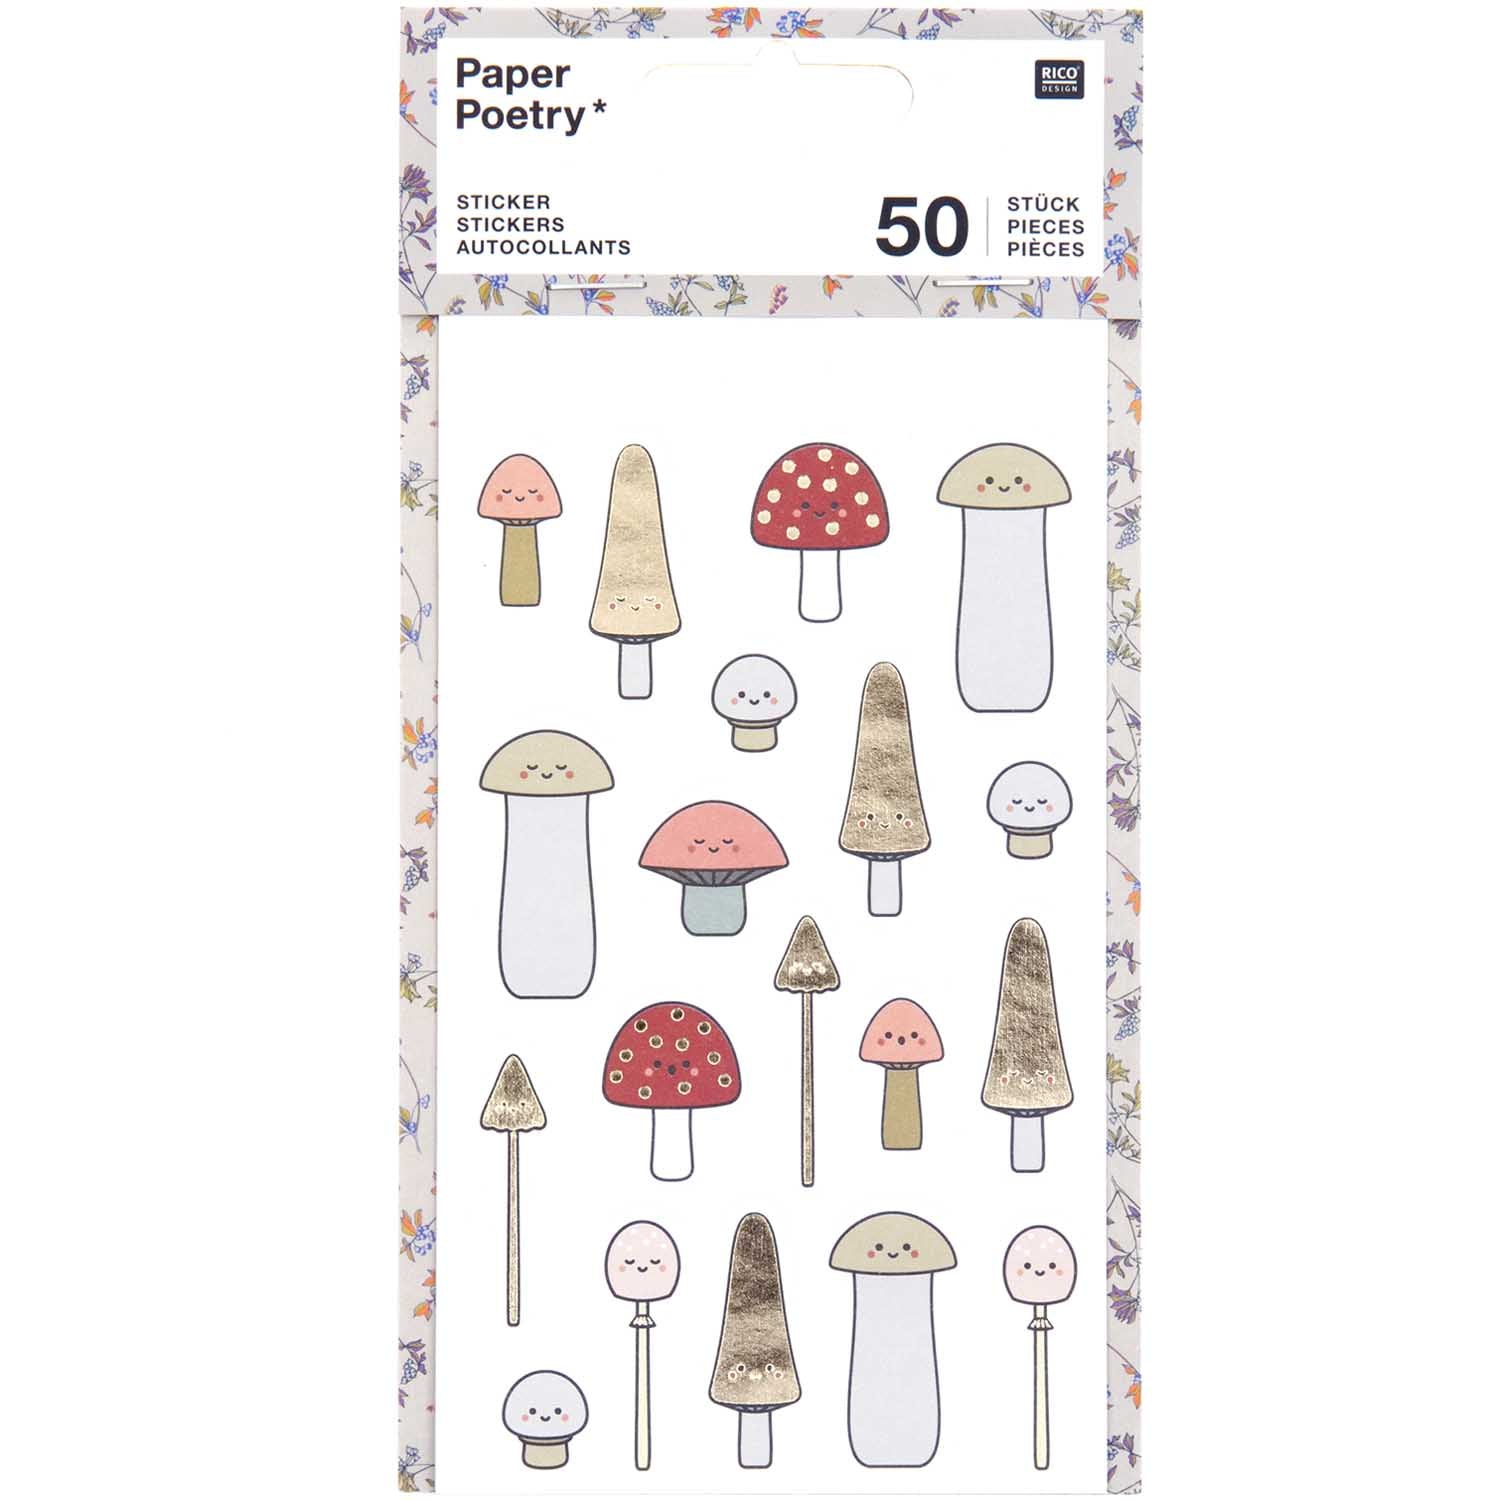 Paper Poetry Funny Fall Stickers Fall Mushroom